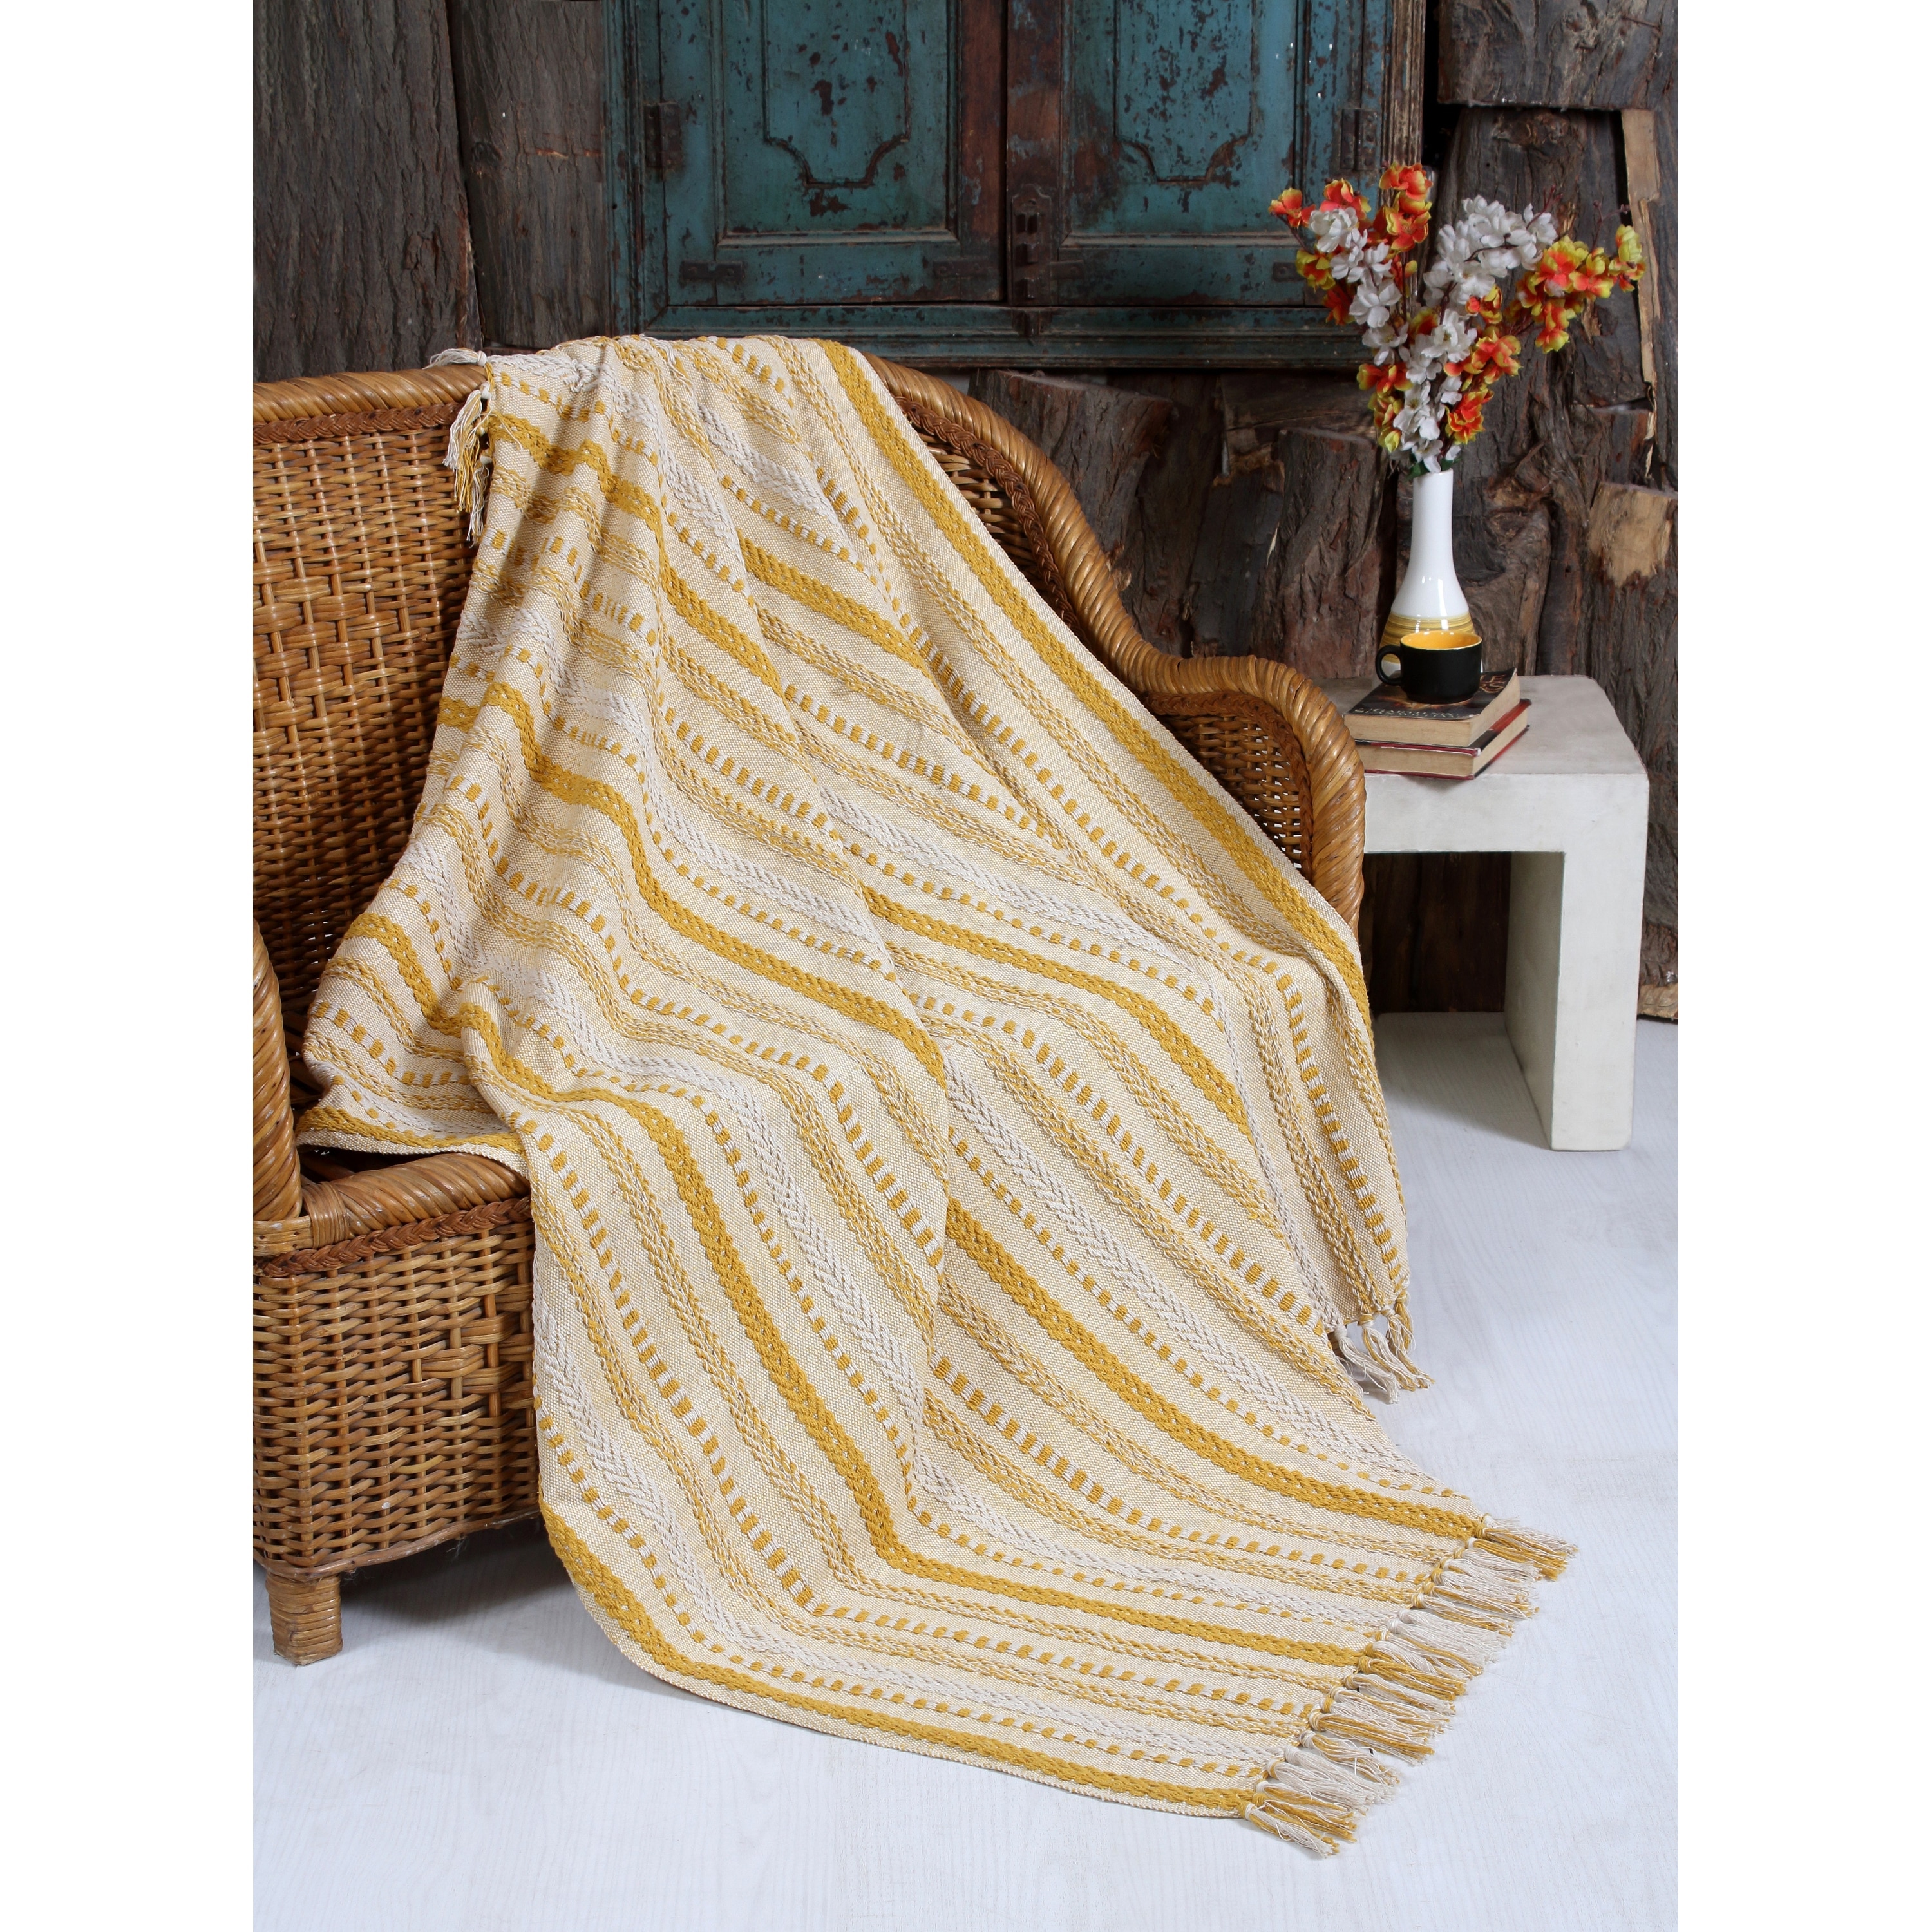 New Products Handmade Blankets and Throws | Shop our Best Blankets ...